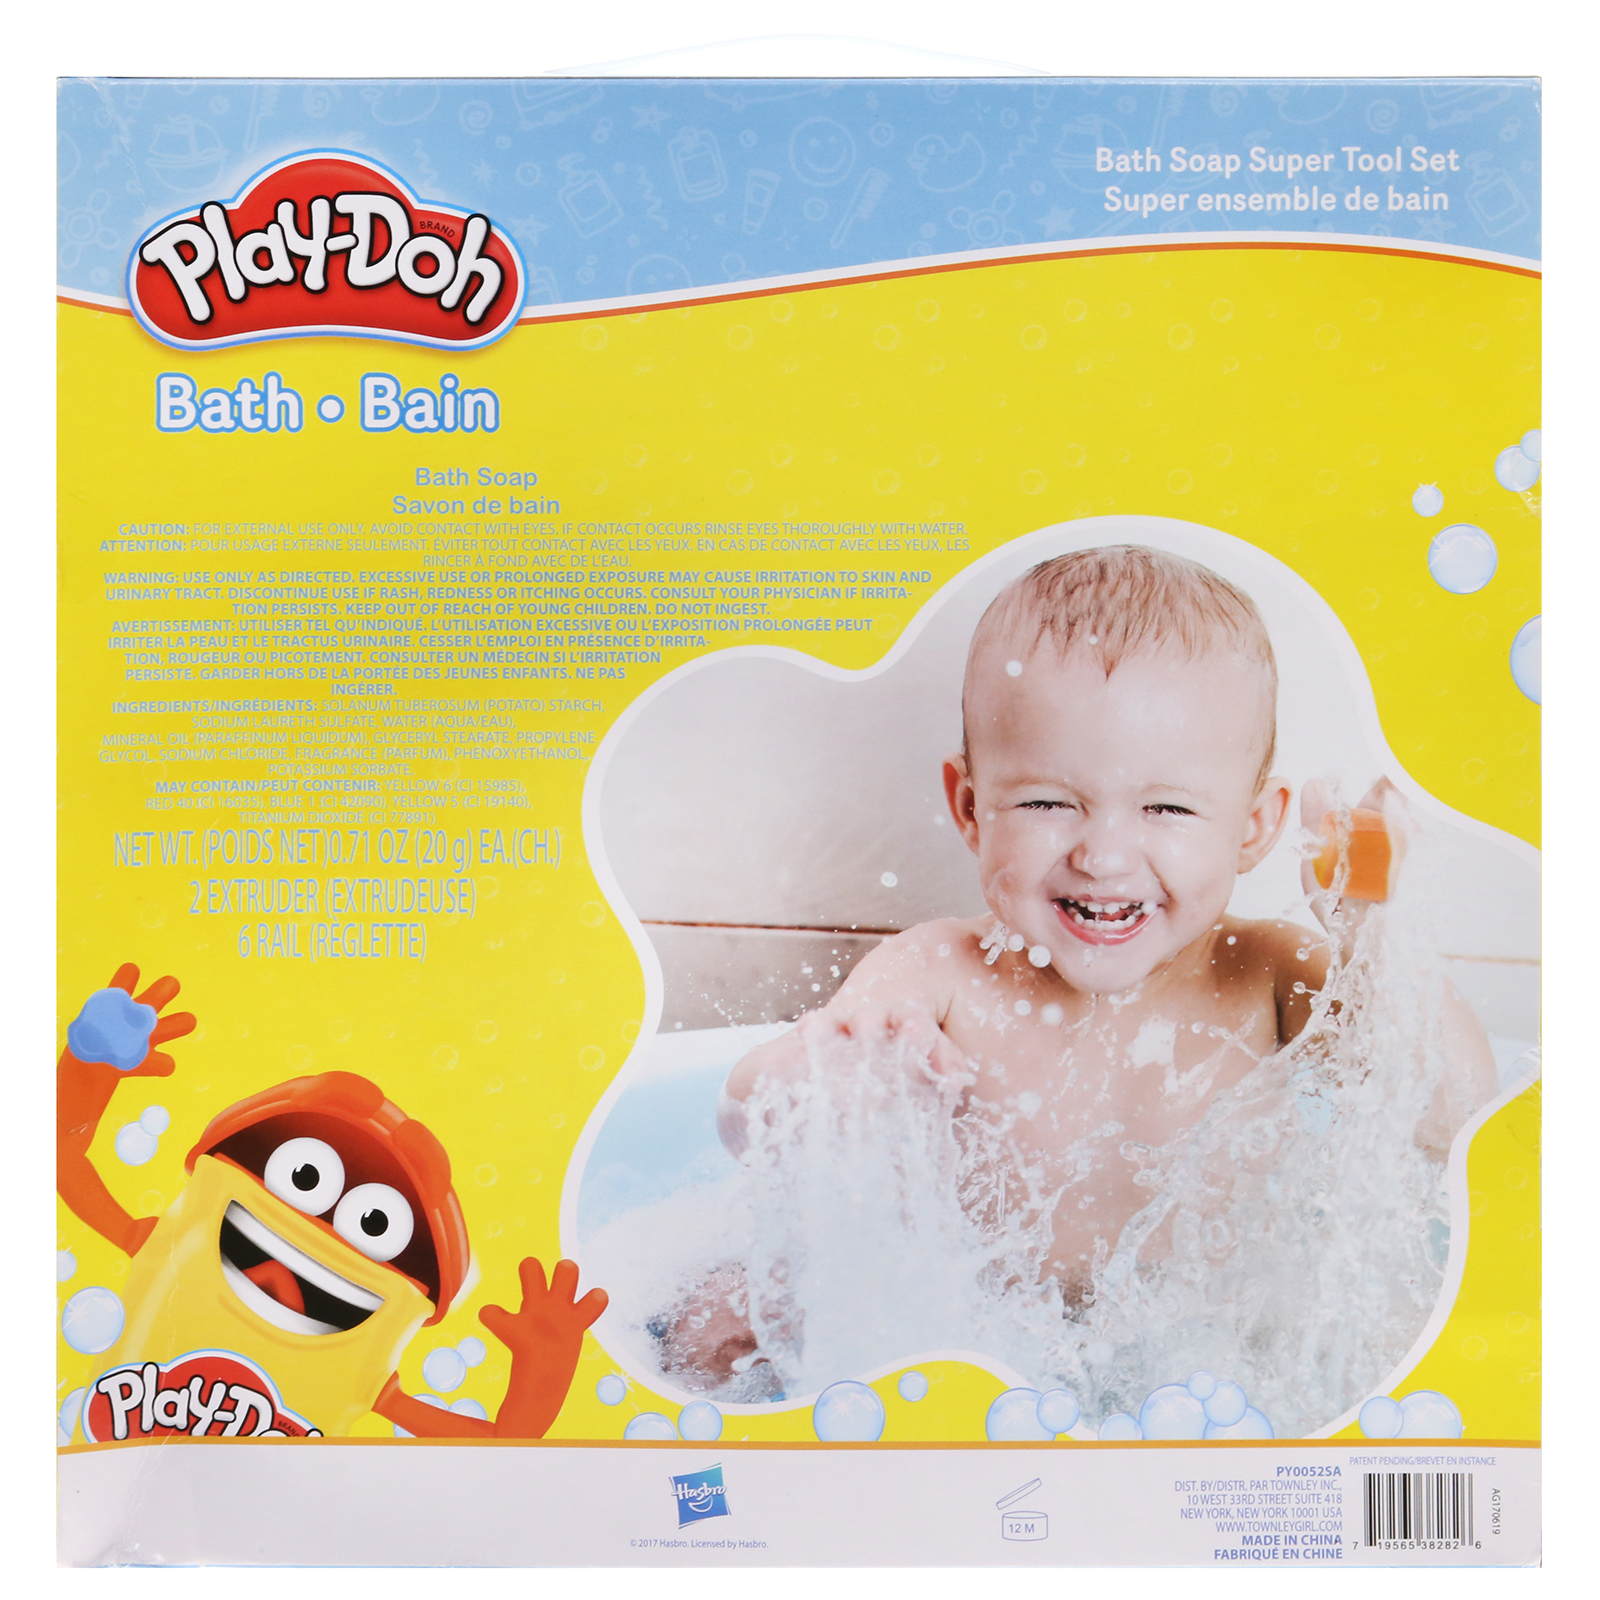 Your kid's bath time just got more fun! #parents #playdoh #momsoftikto, Play Doh